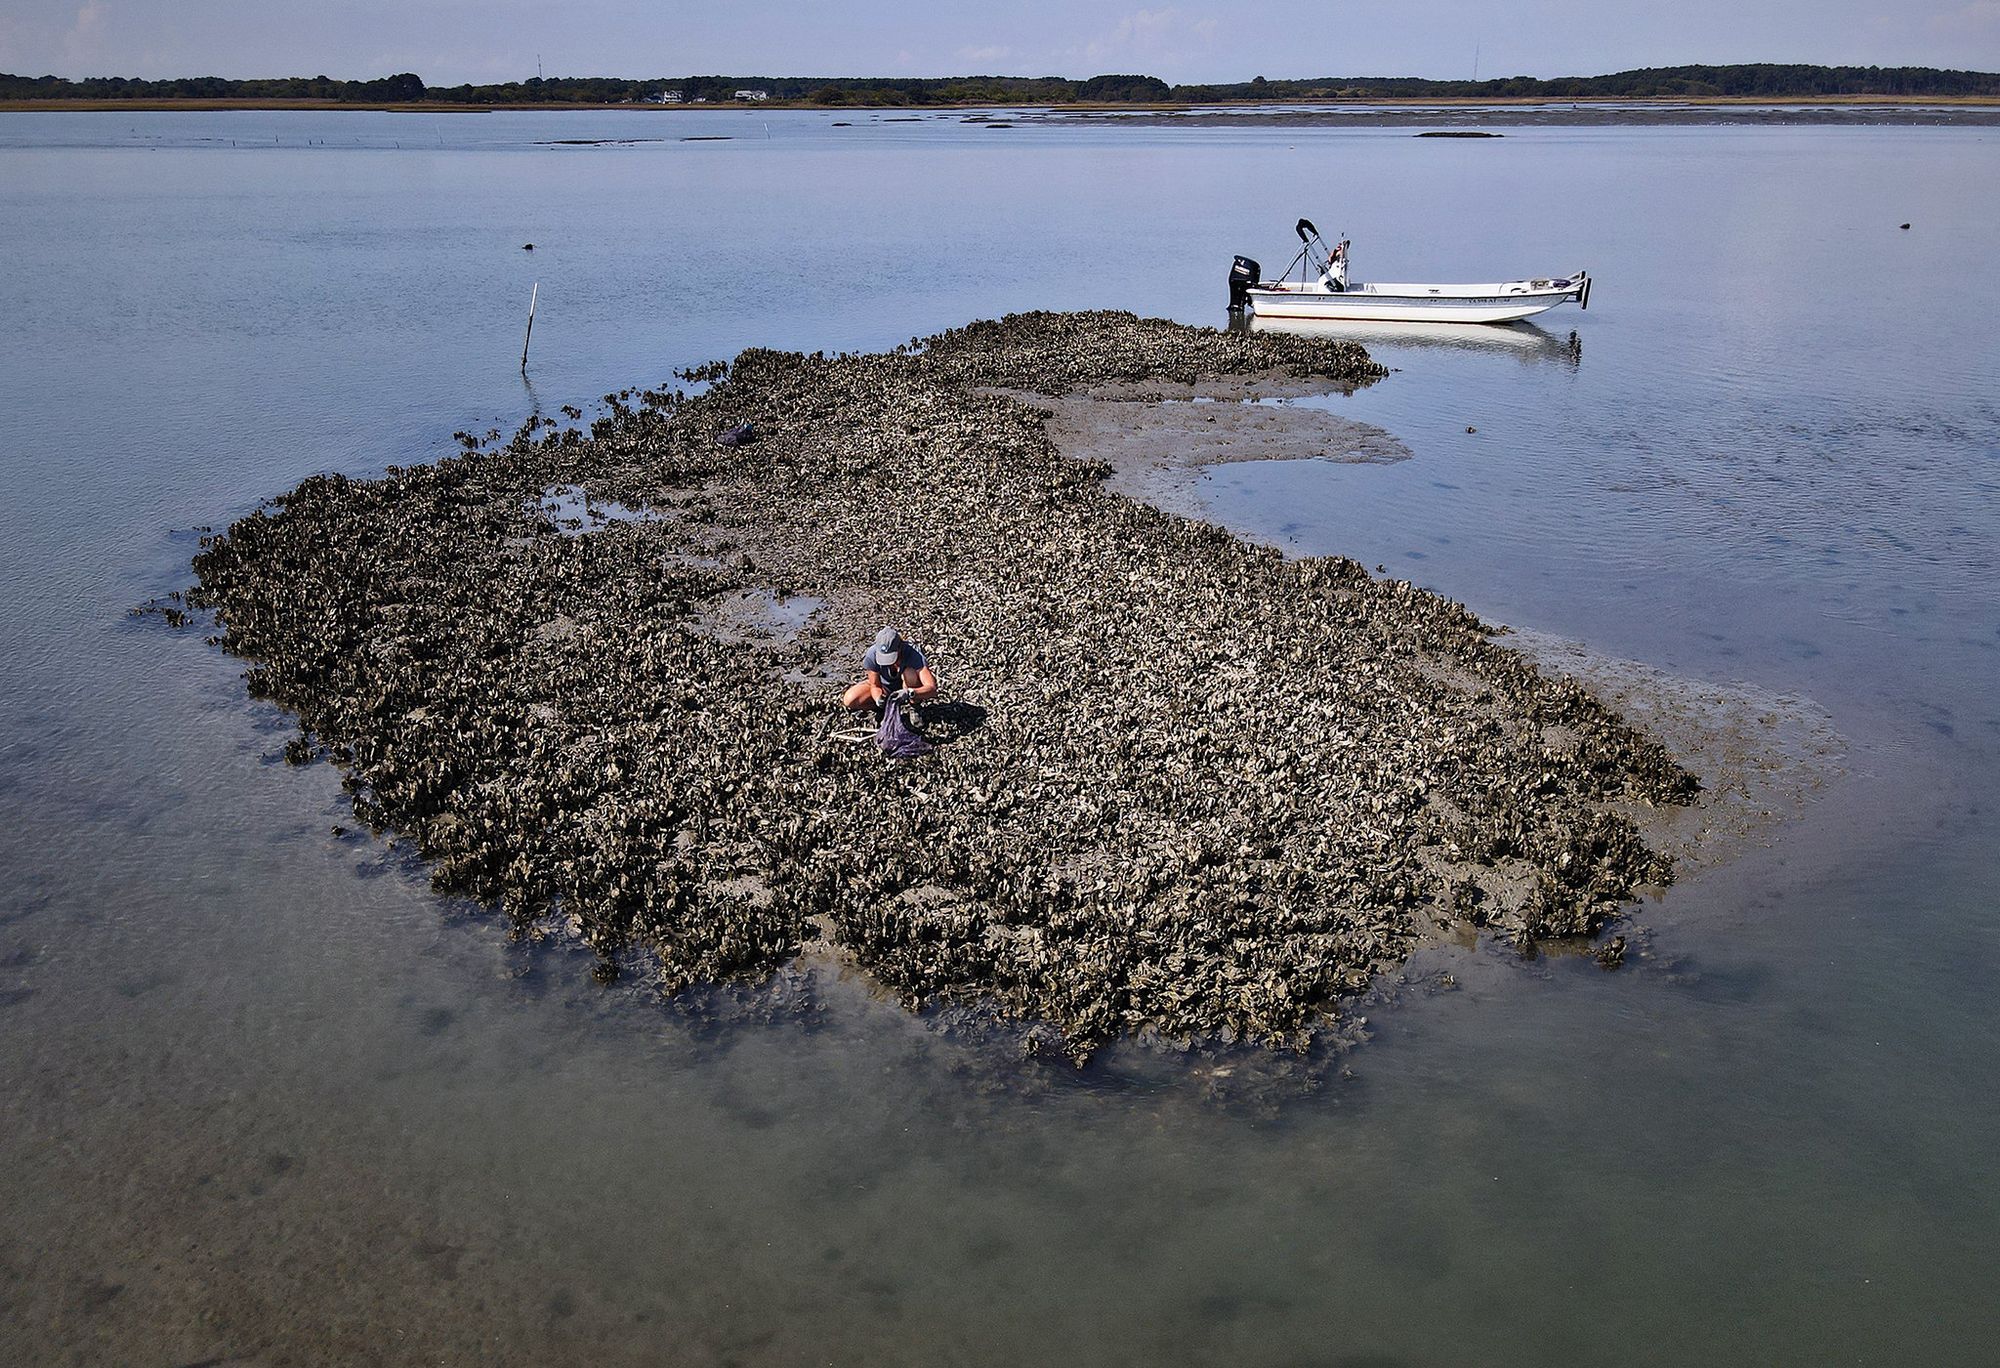 A person on an oyster reef that's like an island in the middle of water. A boat is moored in the background.